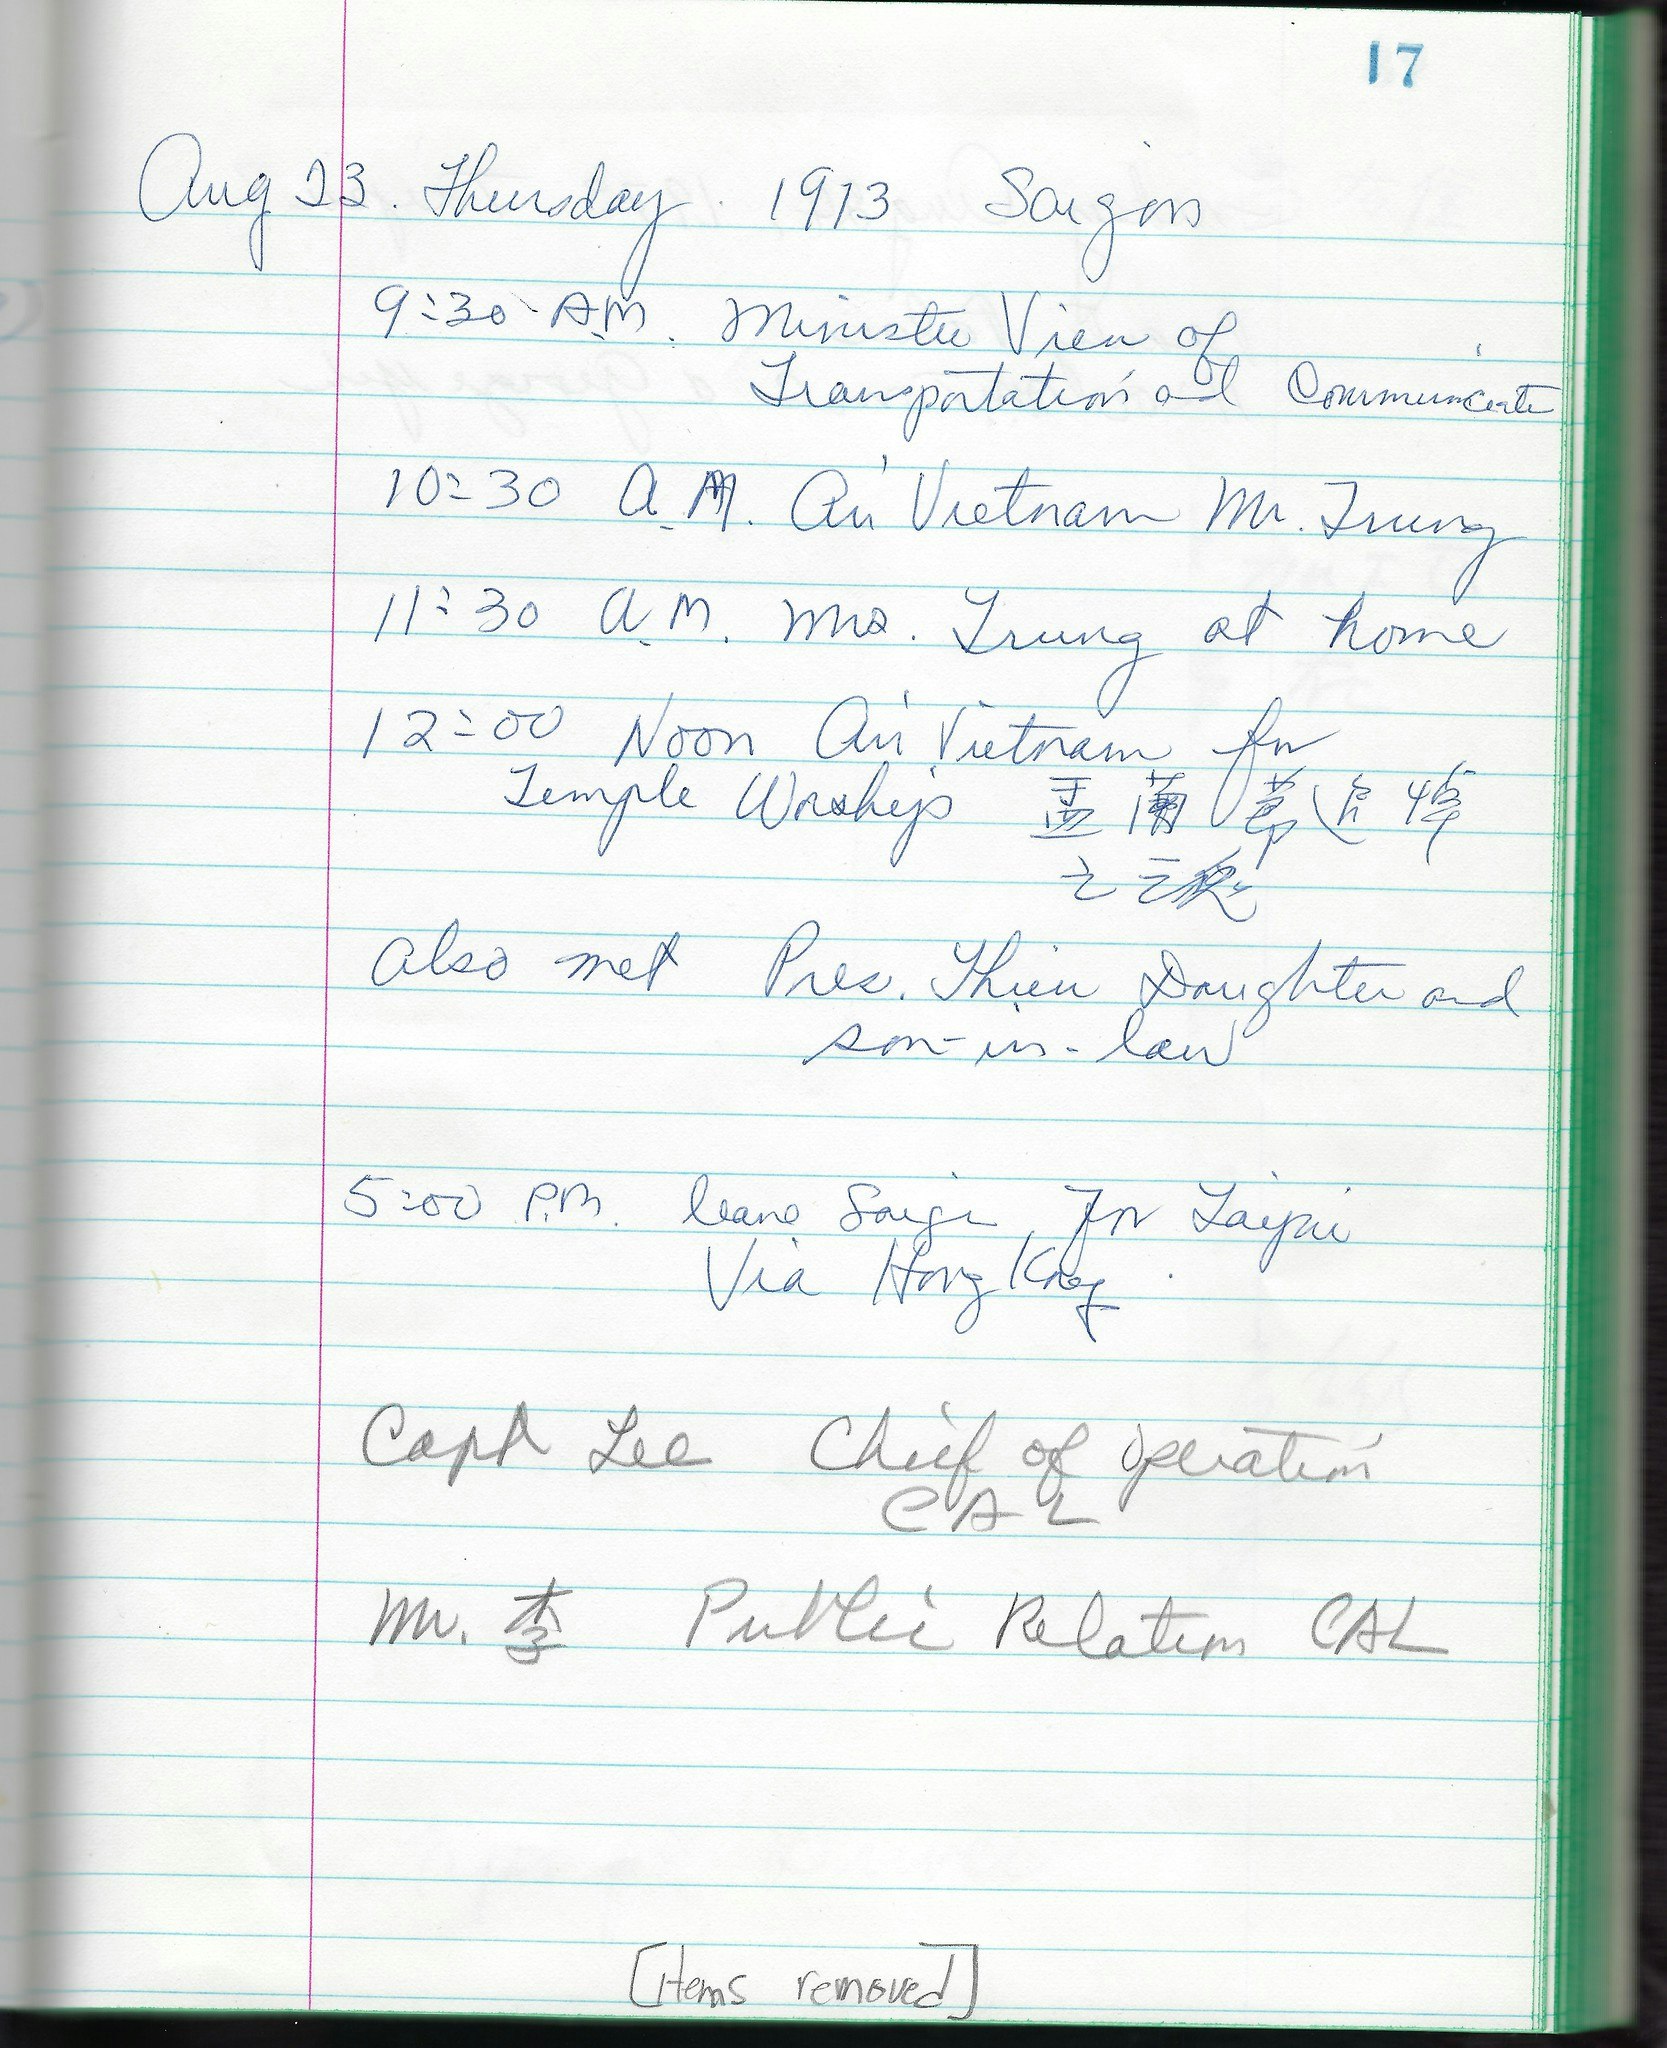 Page from Anna Chennault's diary. Page outlines her activities during her travels on 08/13/1913